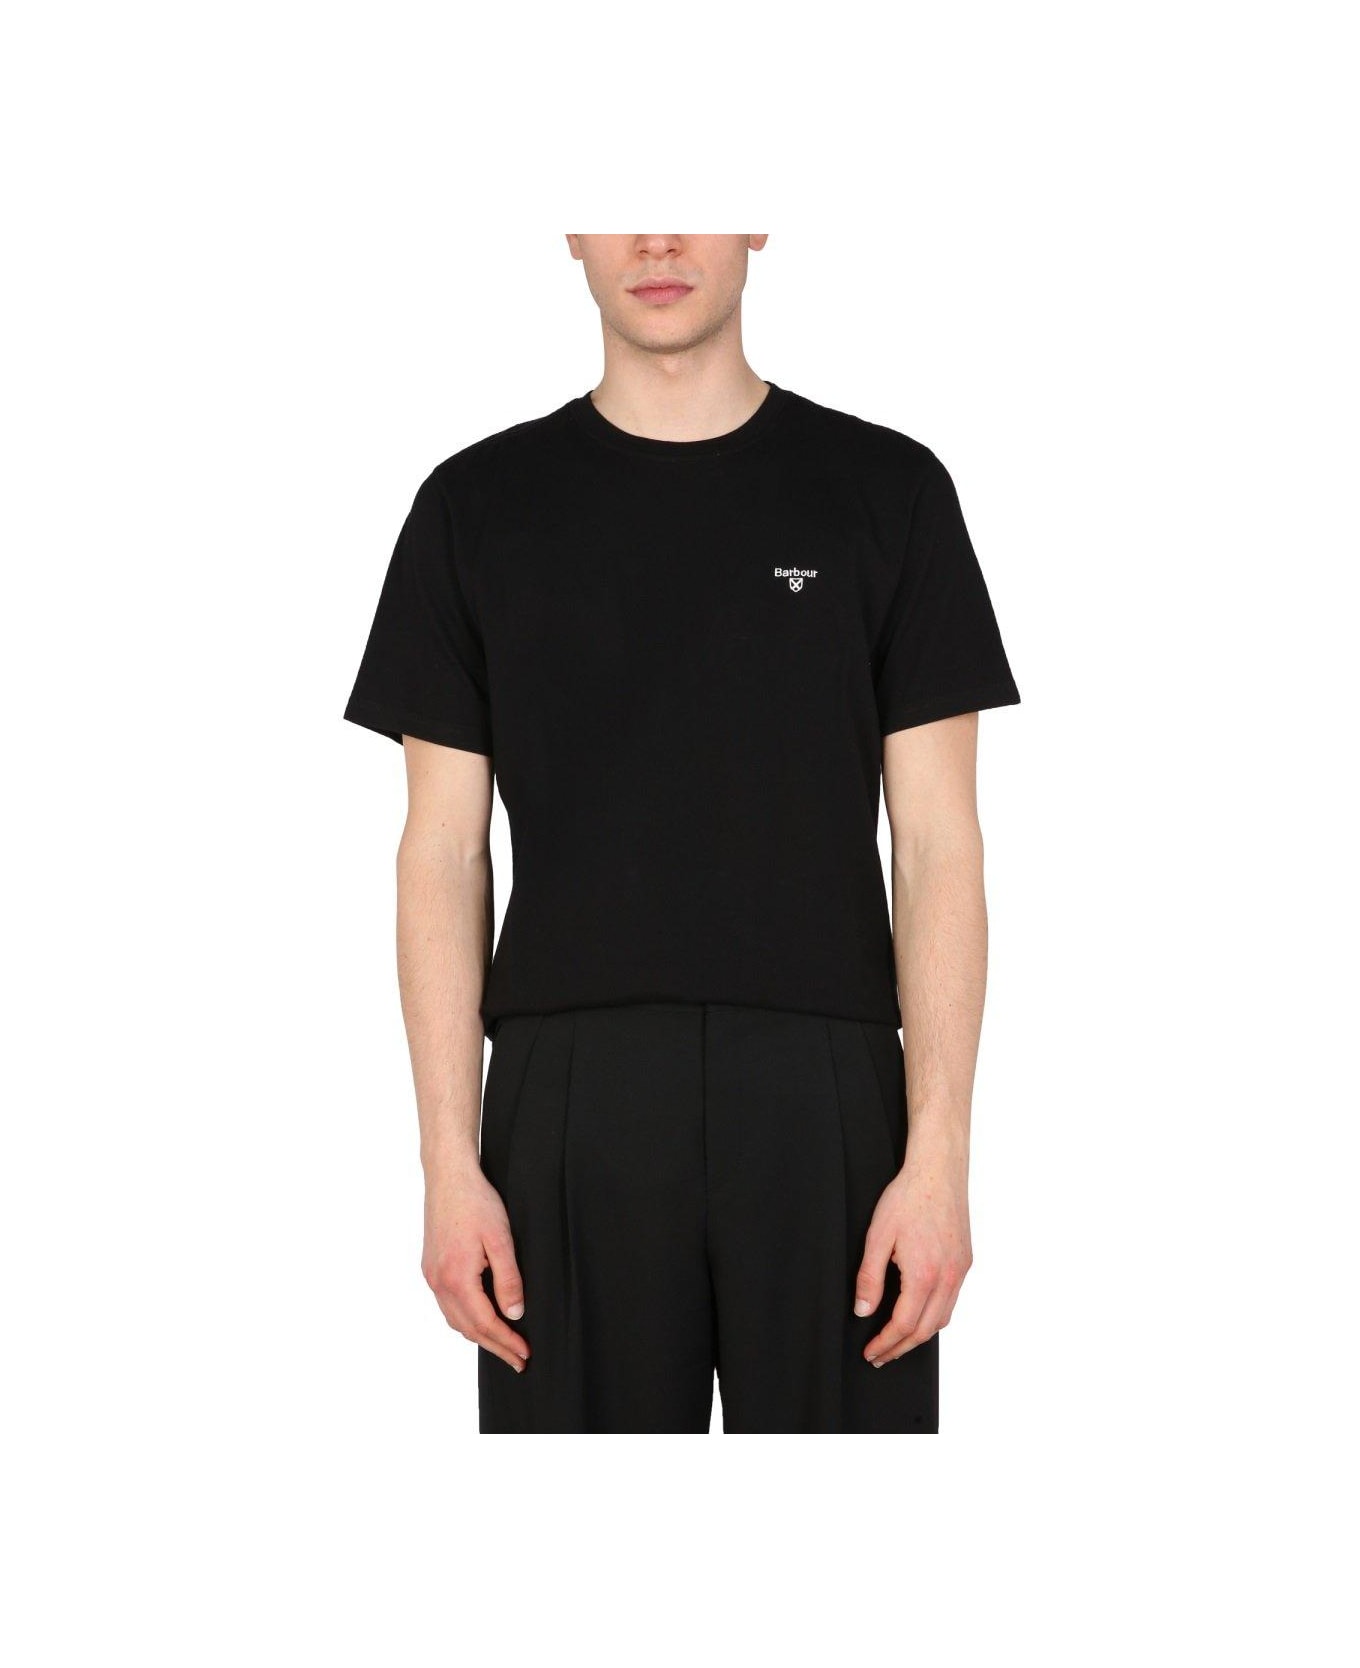 Barbour Logo Embroidered T-shirt - Black